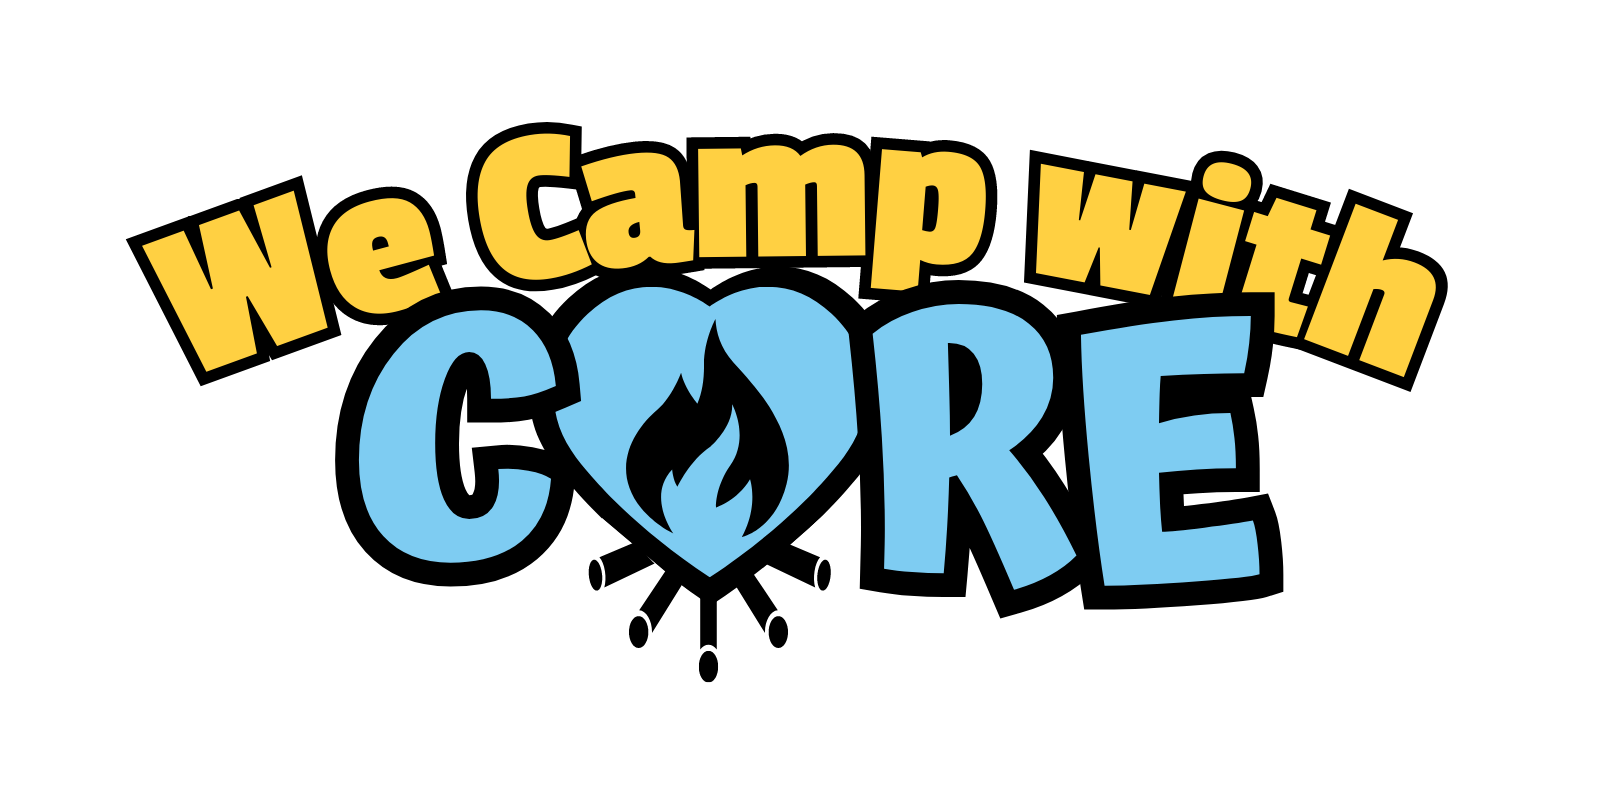 We Camp with Care Logo_Email (1600 × 800 px) (2)